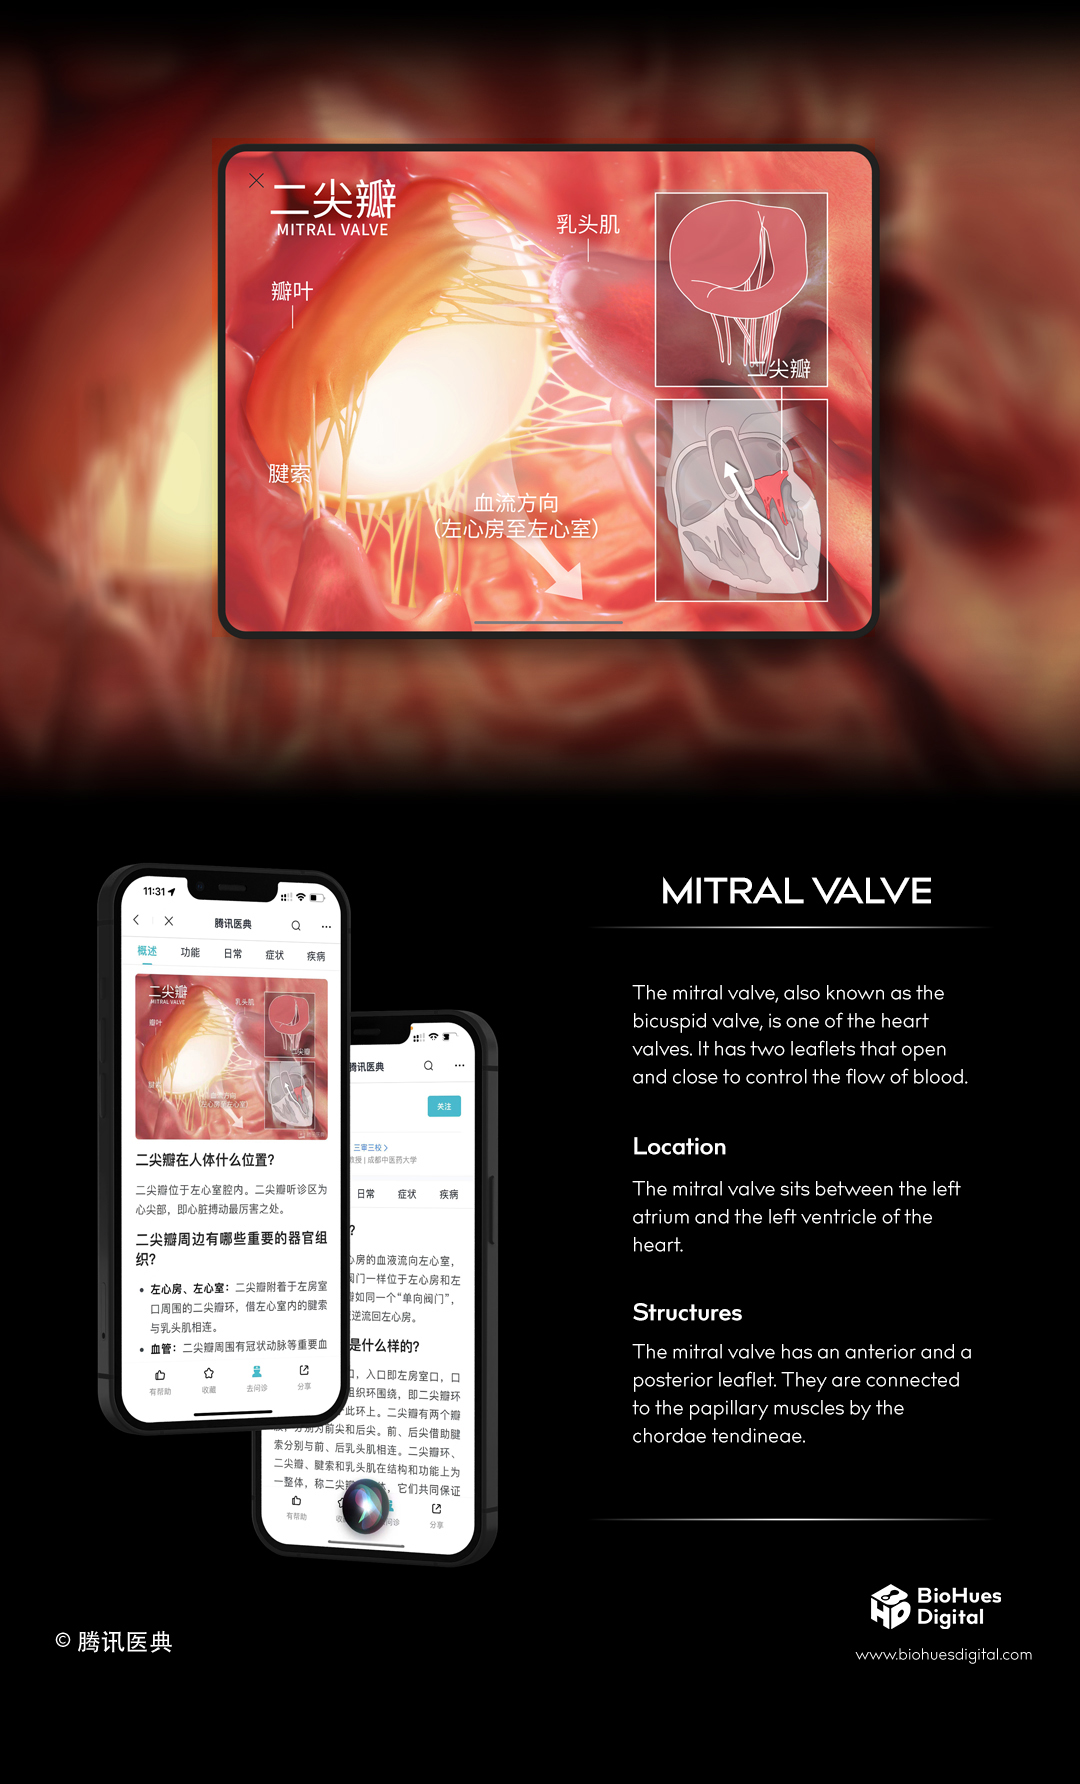 medical illustration medical poster of the mitral valve and the heart anatomy